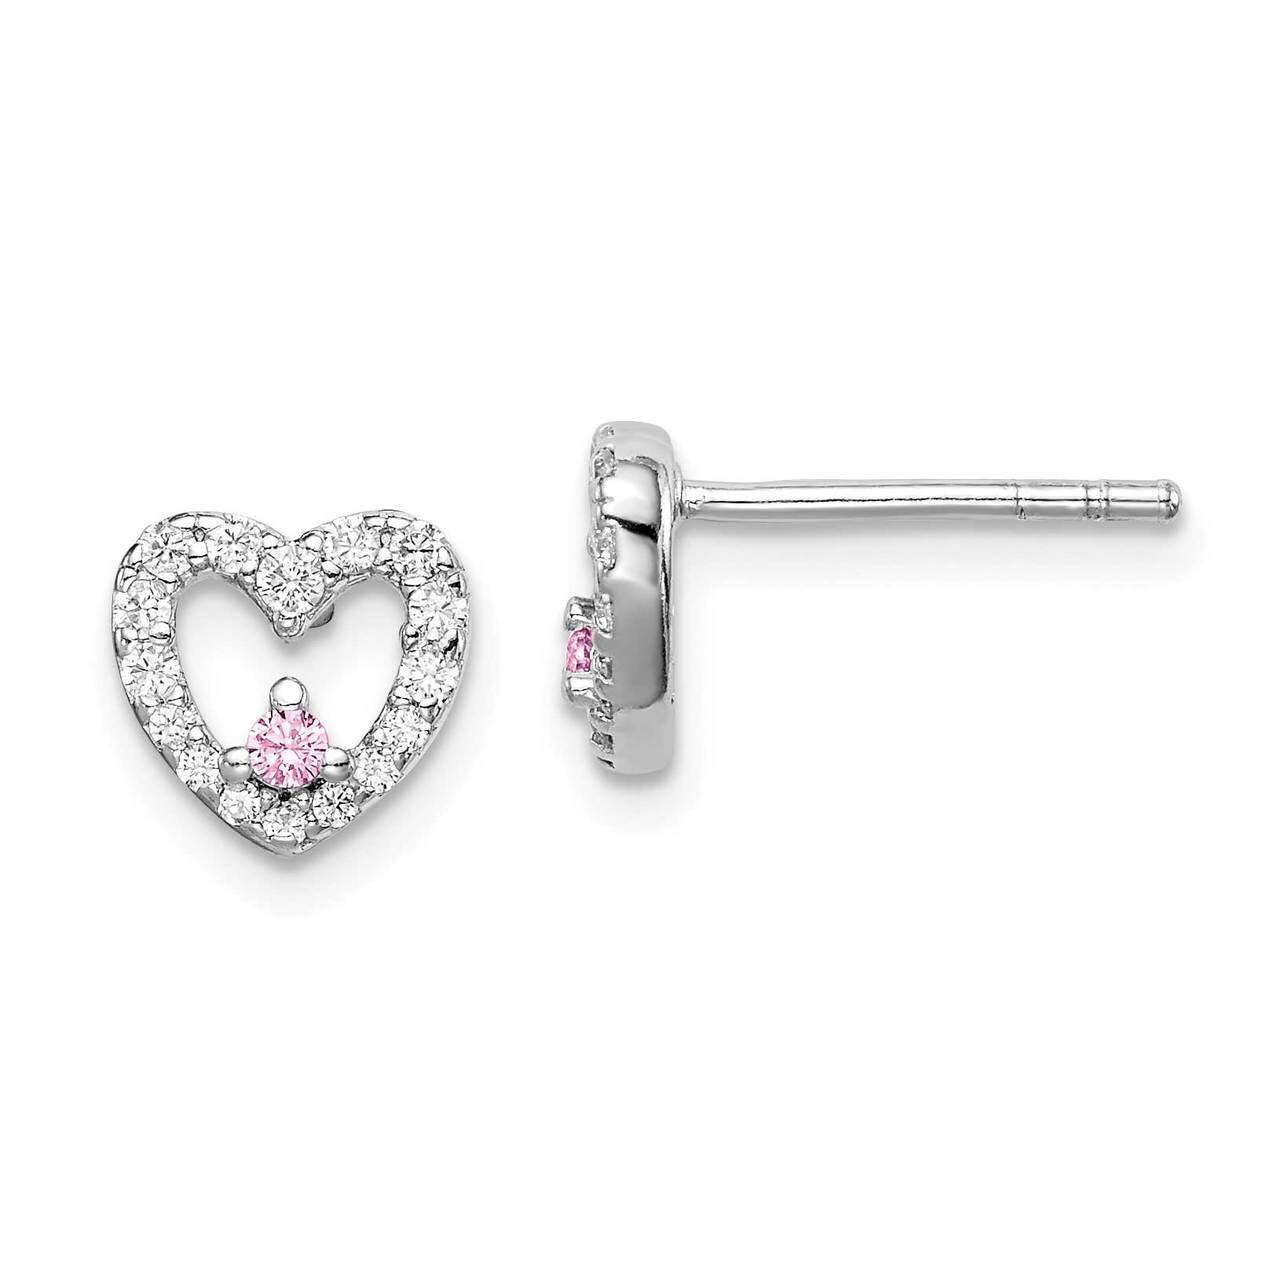 Pink & Clear CZ Diamond Heart Post Earrings Sterling Silver Rhodium Plated QE15235